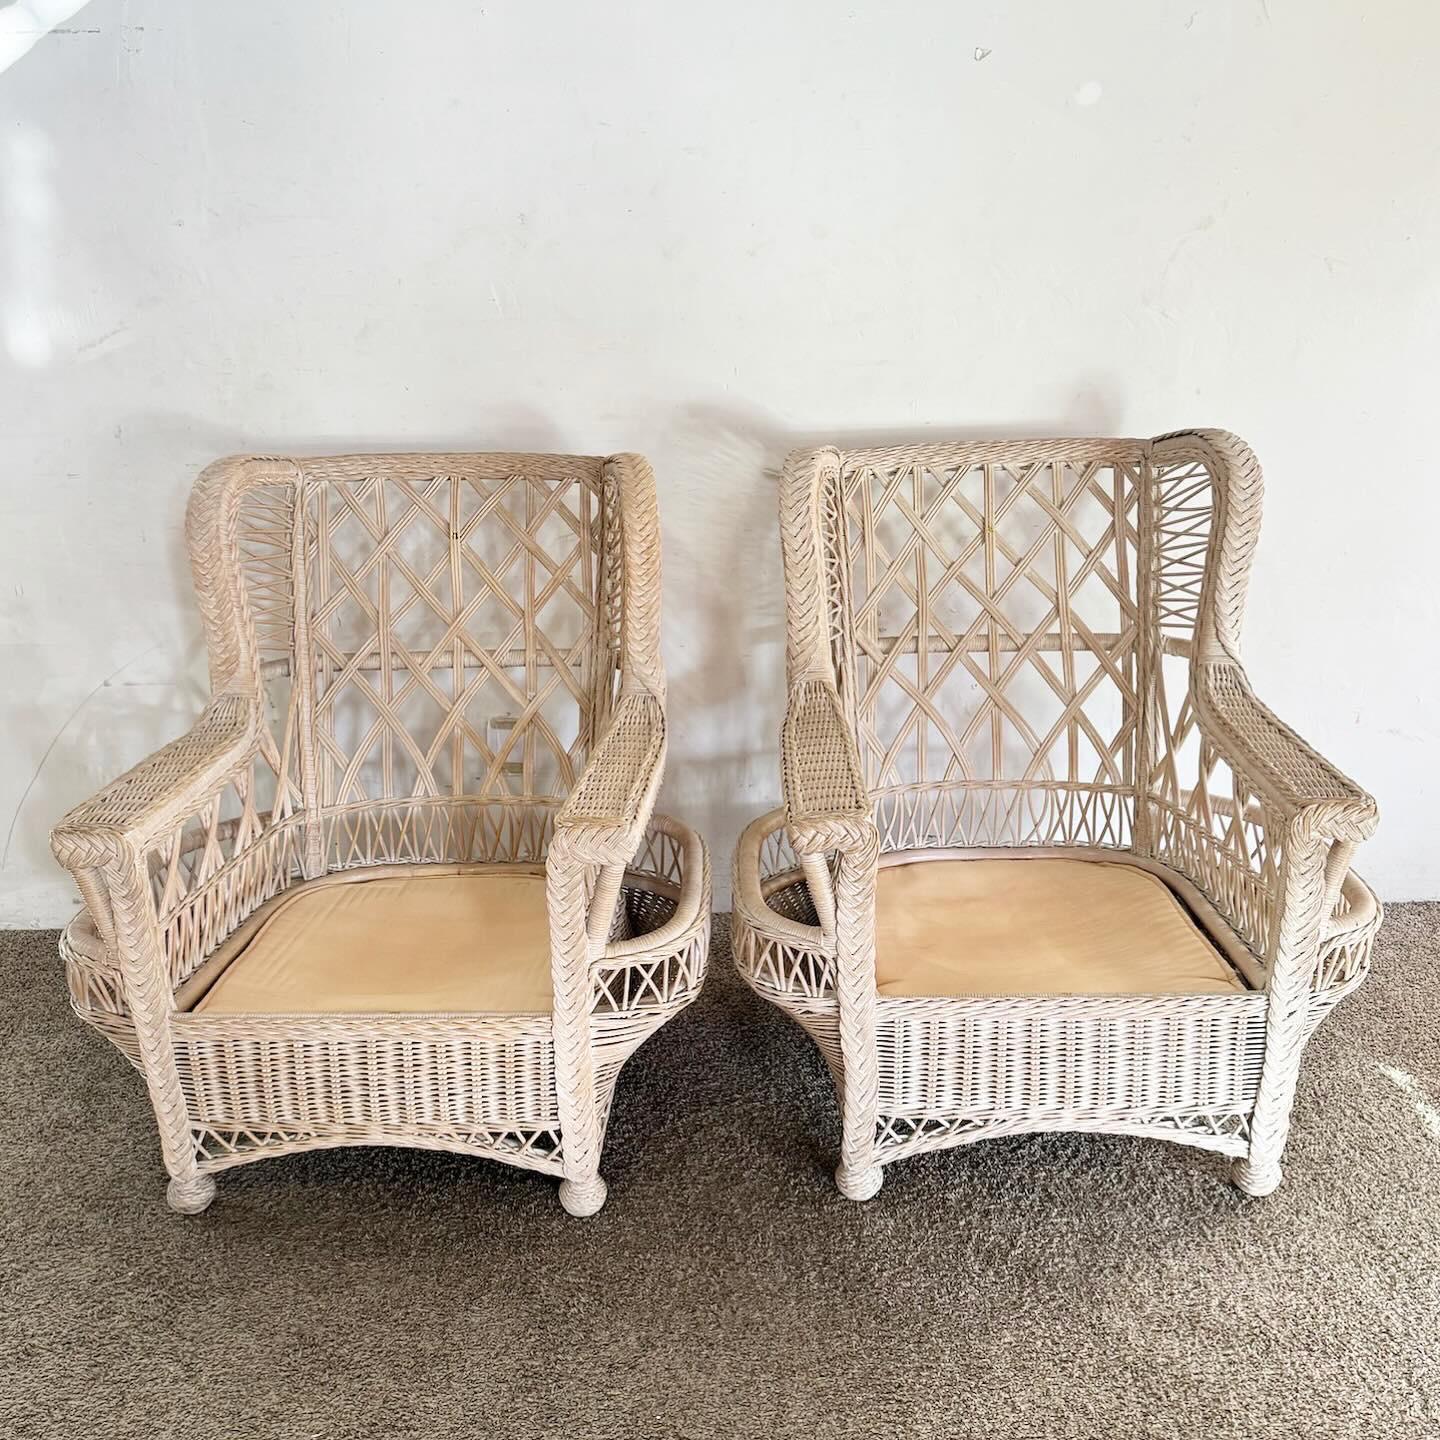 20th Century Boho Chic Wicker Rattan Lounge Chairs With Ottoman - 3 Pieces